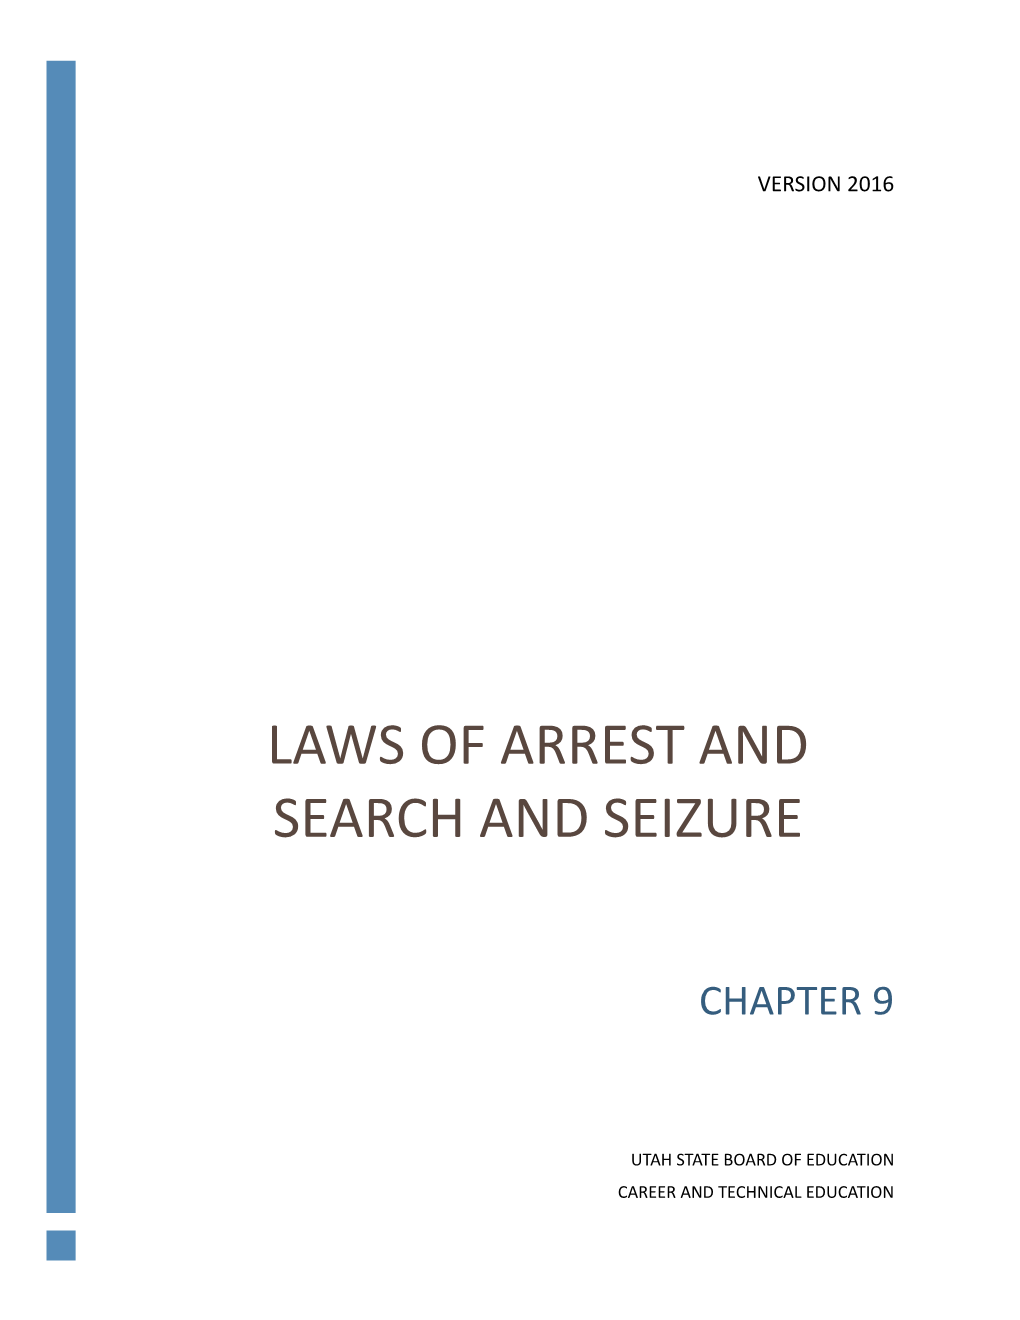 Chapter 9: Laws of Arrest and Search and Seizure